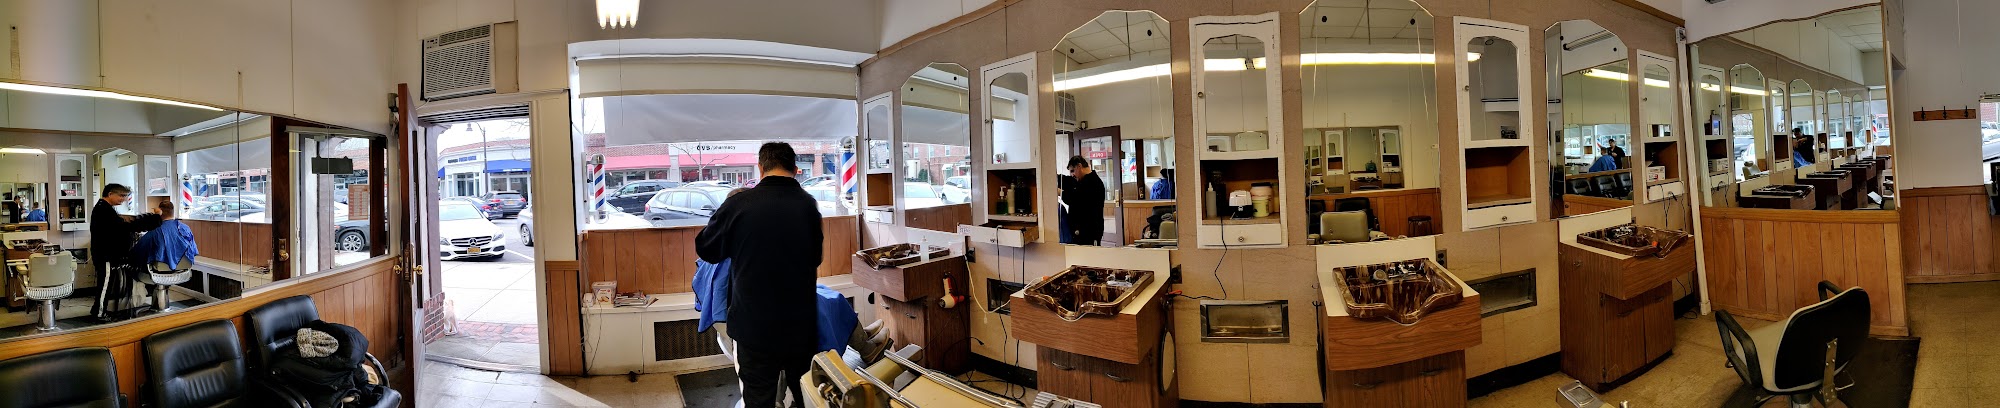 Tower Barber Shop 113 Pondfield Rd, Bronxville New York 10708